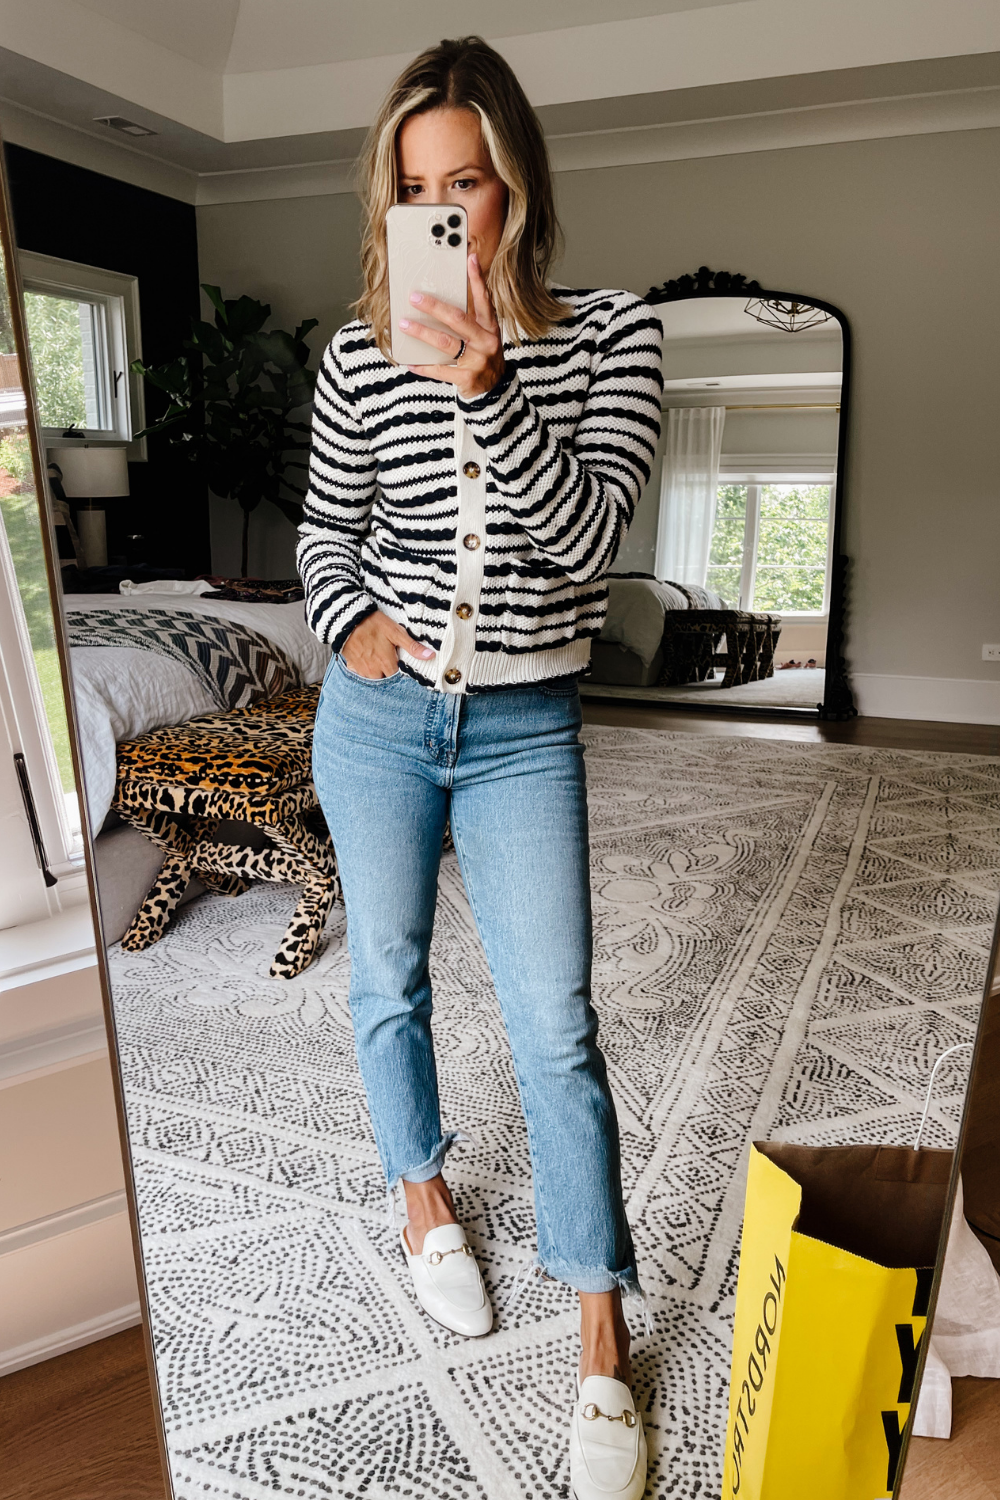 Suzanne wearing a striped cardigan and vintage straight leg denim